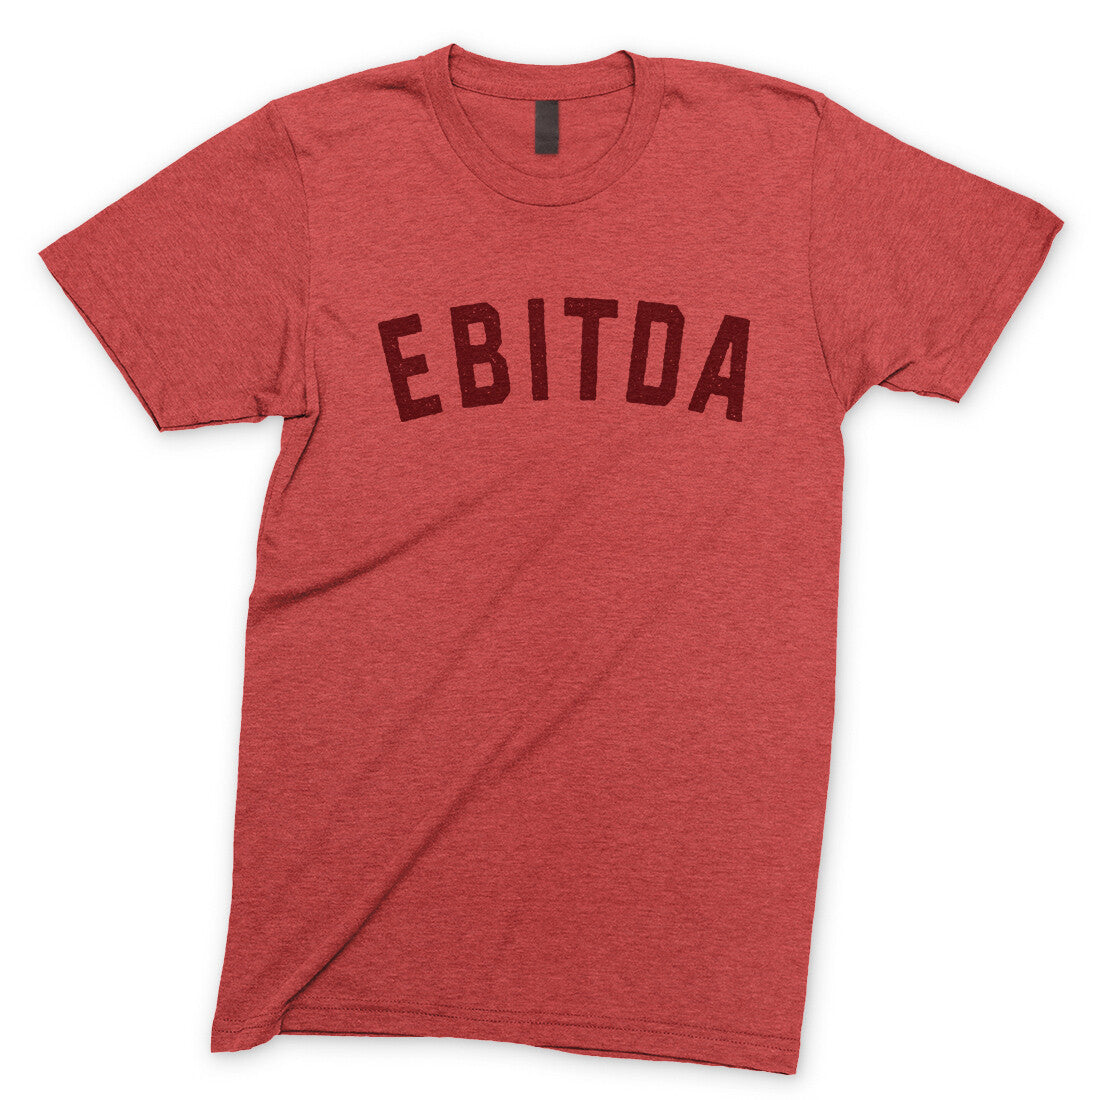 EBITDA in Heather Red Color